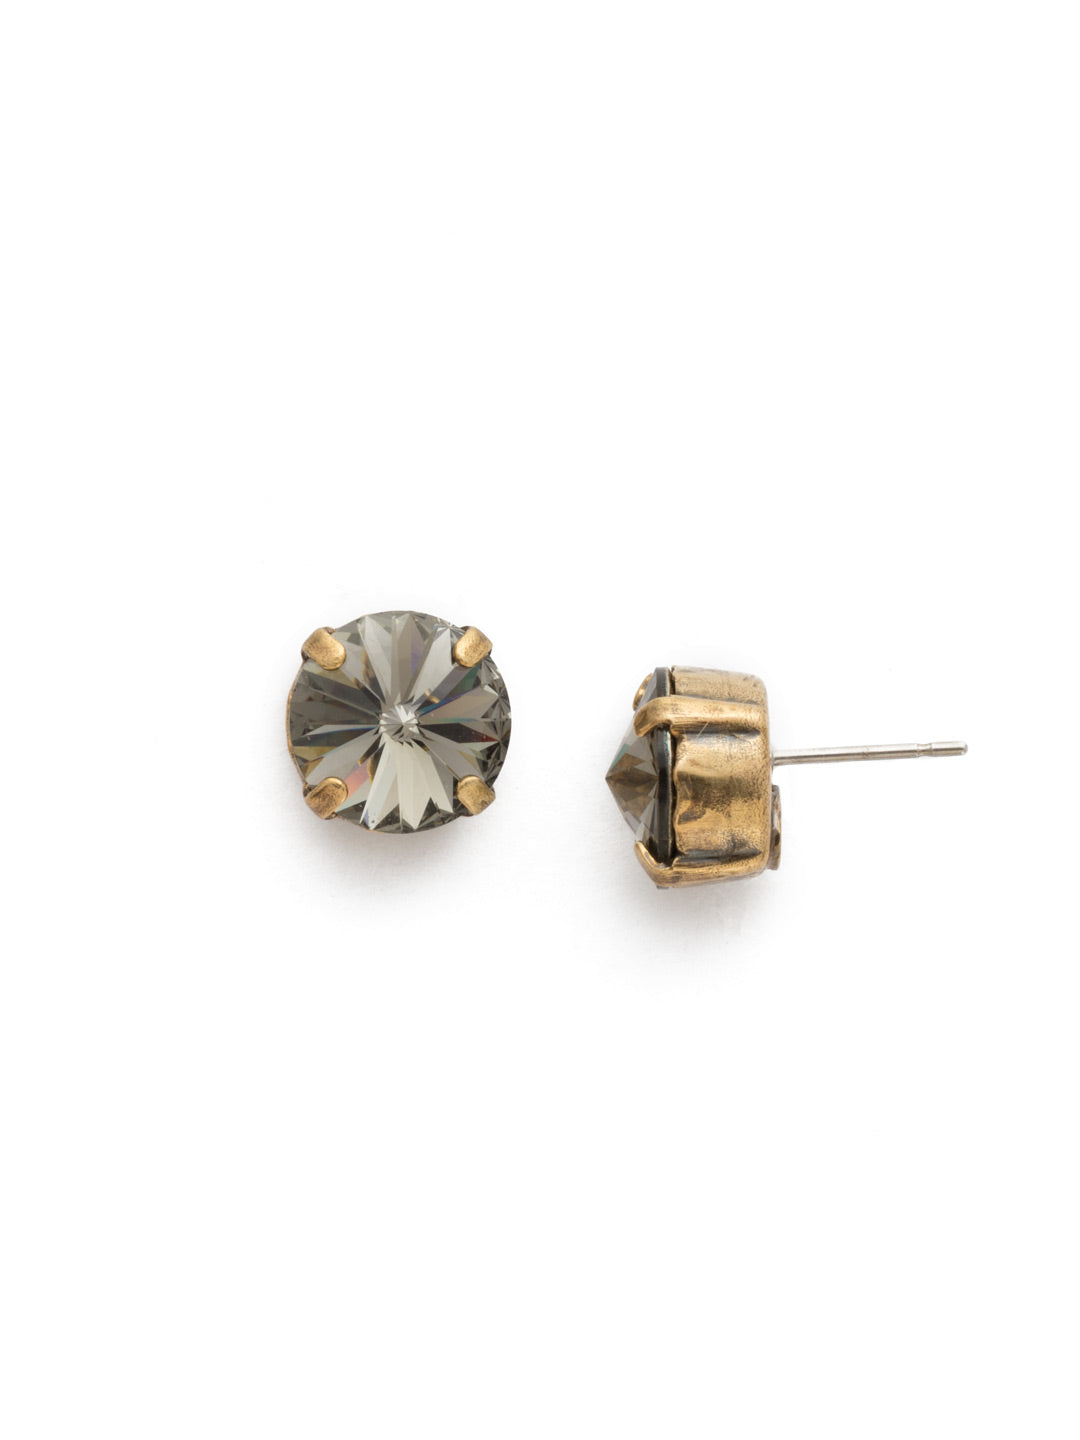 London Stud Earrings - ECM14AGBD - <p>Everyone needs a great pair of studs. Add some classic sparkle to any occasion with these stud earrings. Need help picking a stud? <a href="https://www.sorrelli.com/blogs/sisterhood/round-stud-earrings-101-a-rundown-of-sizes-styles-and-sparkle">Check out our size guide!</a> From Sorrelli's Black Diamond collection in our Antique Gold-tone finish.</p>